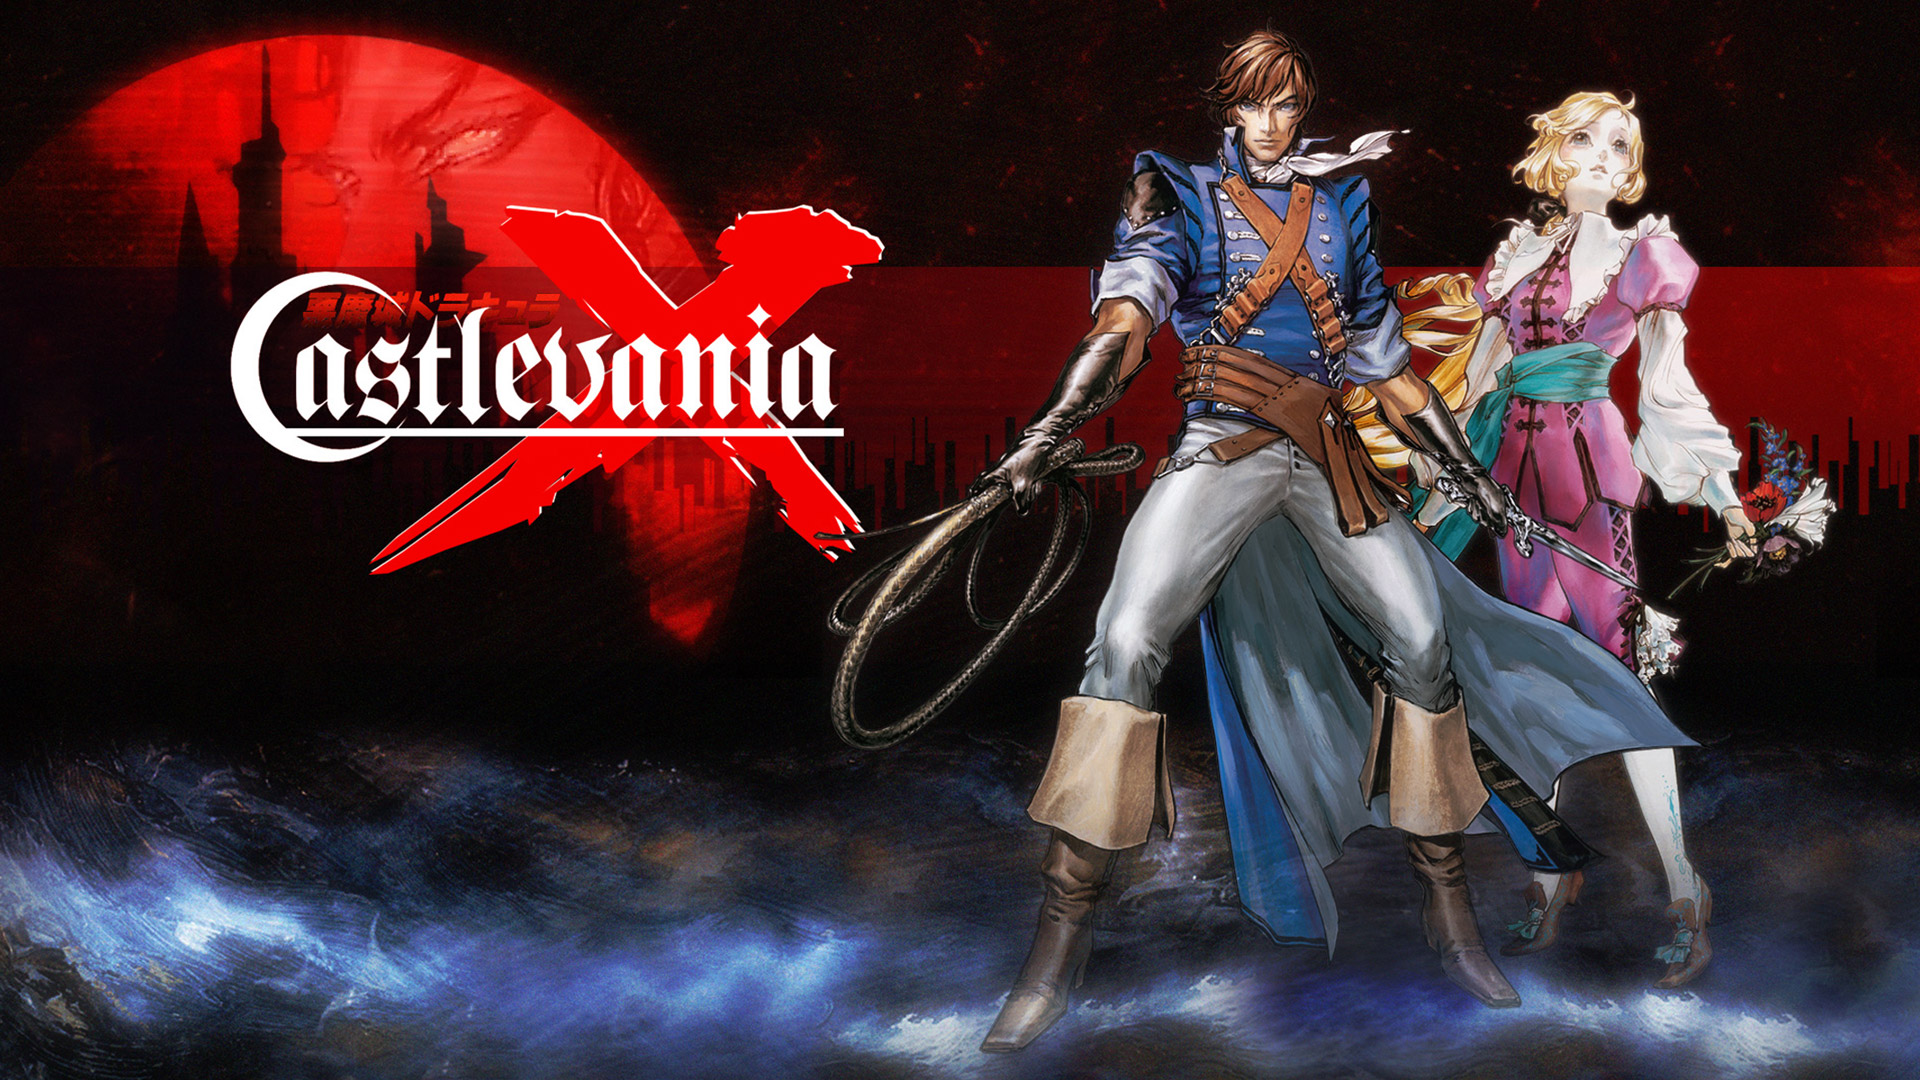 Castlevania The Dracula X Chronicles Wallpaper In